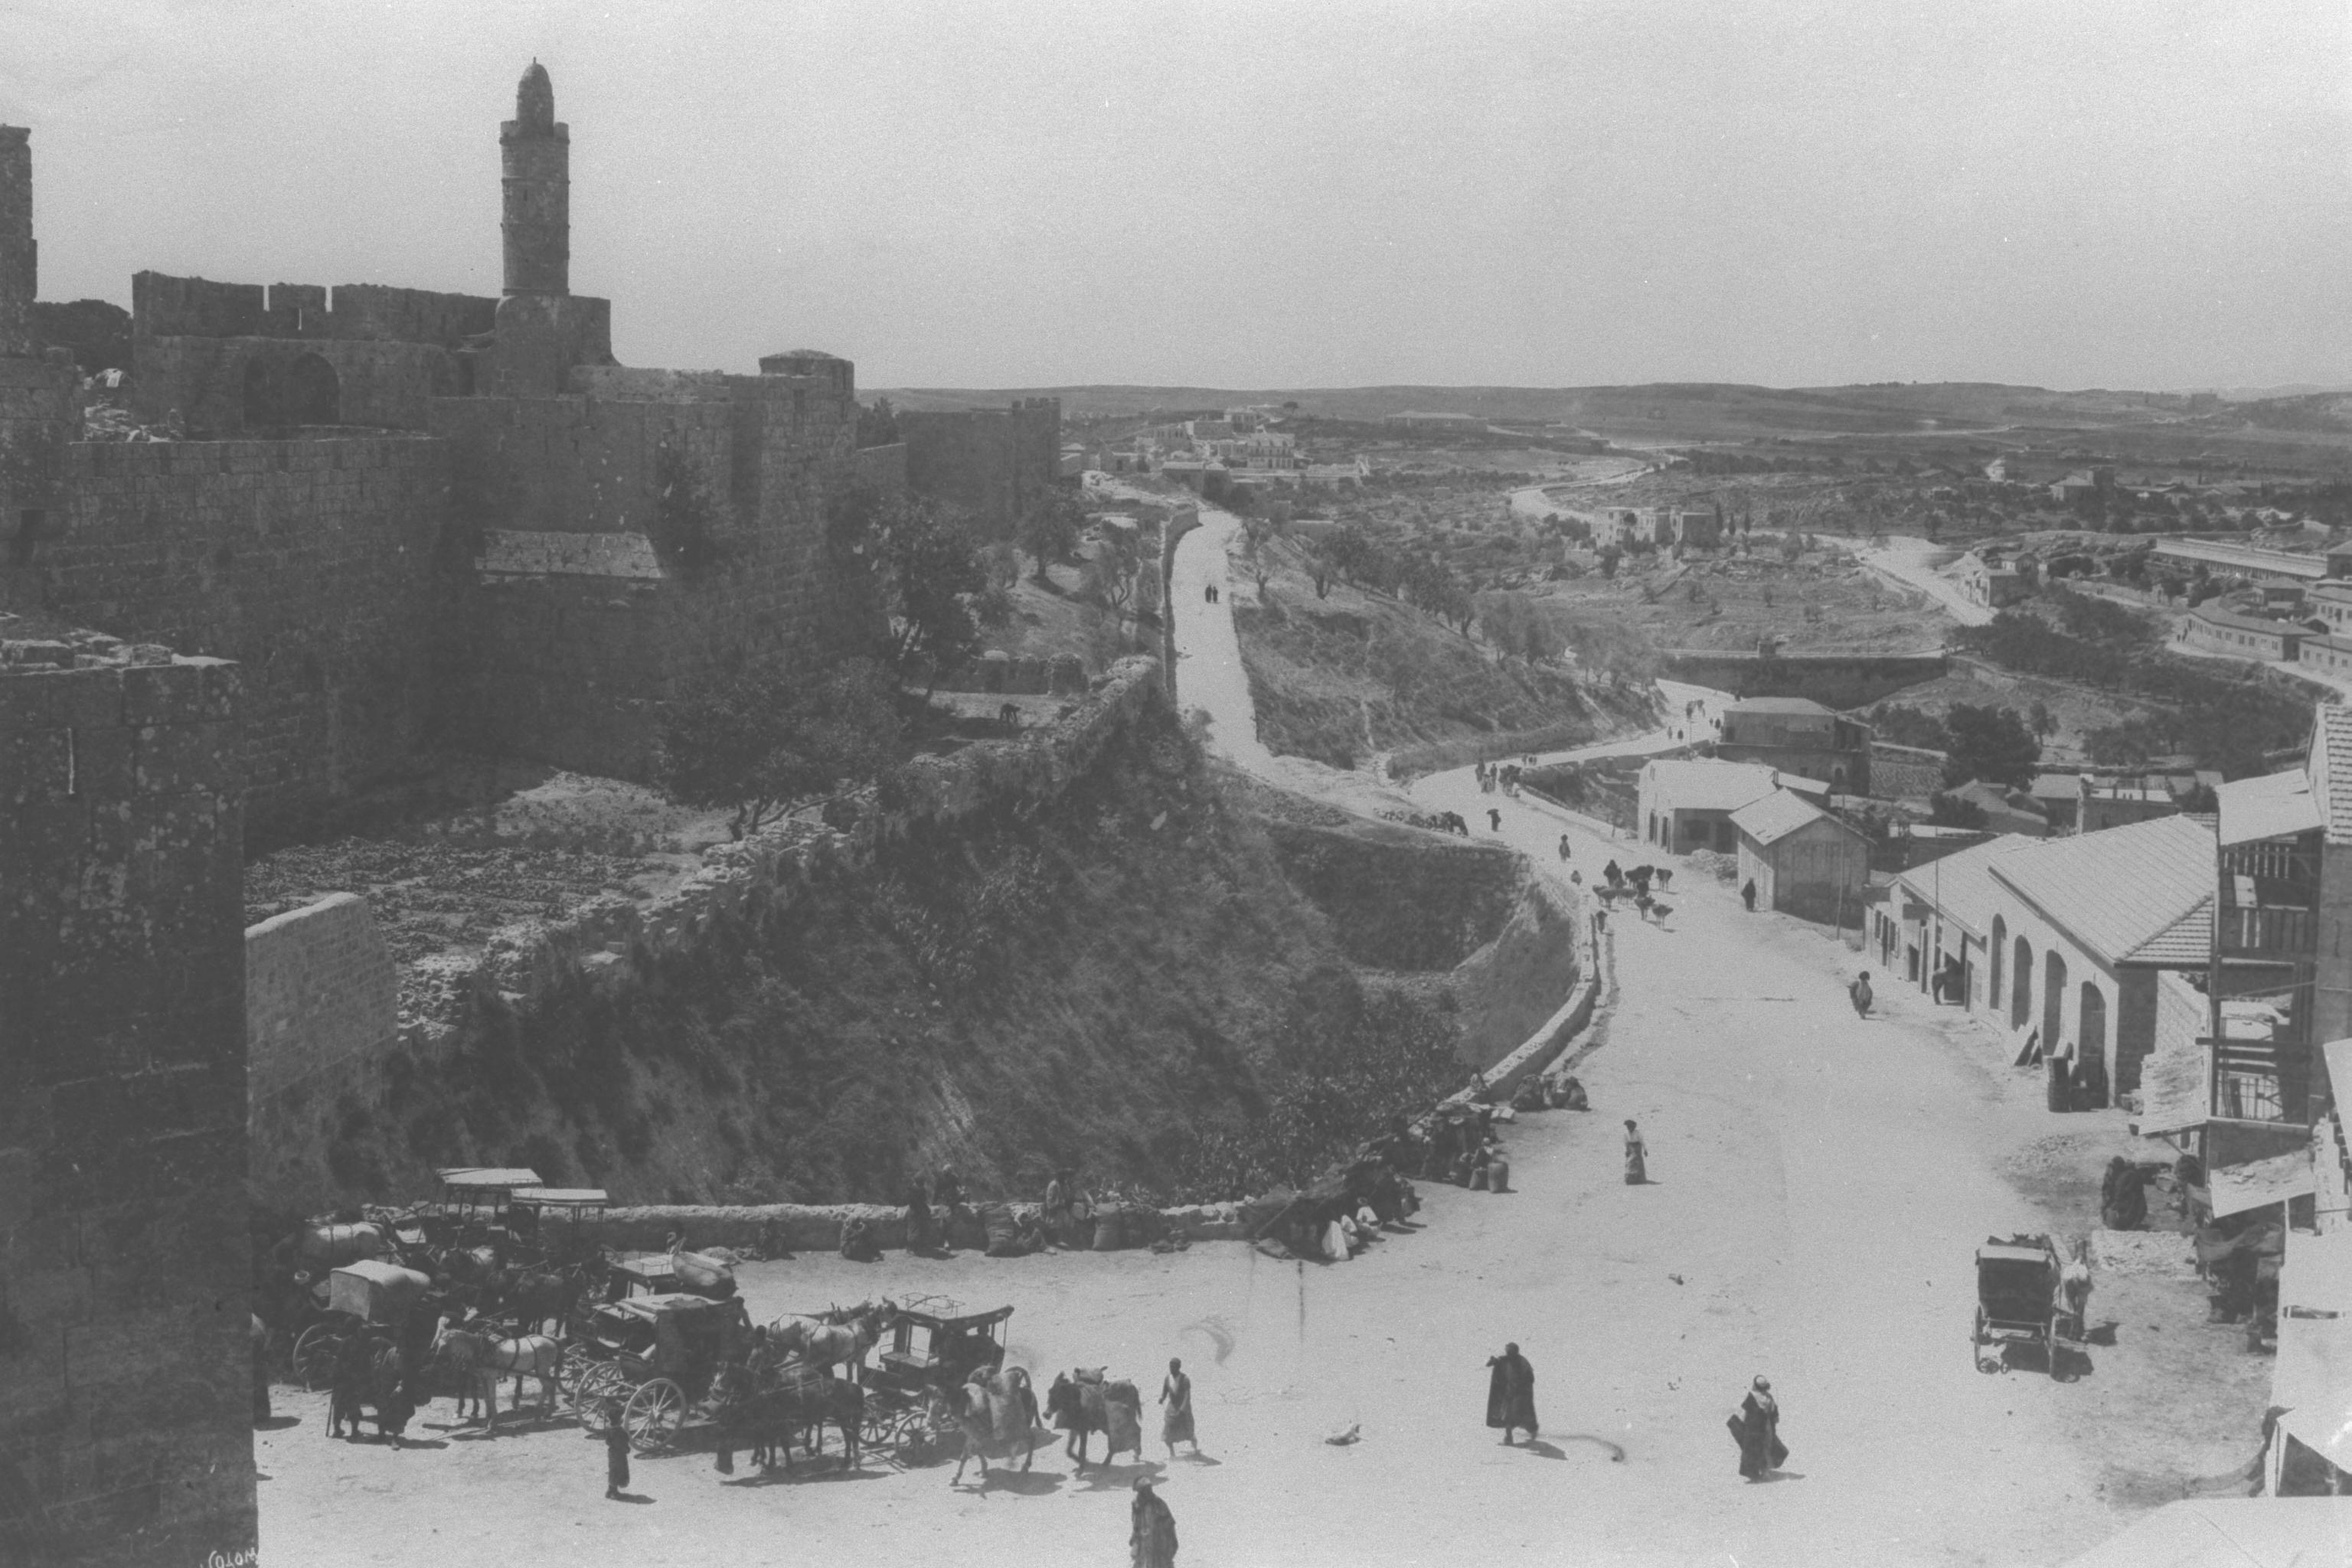 GENERAL VIEW OF THE WALL AROUND THE OLD CITY OF JERUSALEM  DAVIDS TOWER FROM THE JAFFA GATE FACING SOUTH. COURTESY OF AMERICAN COLONY חומות העיר העתיקה בירושלים ומגדל דוד